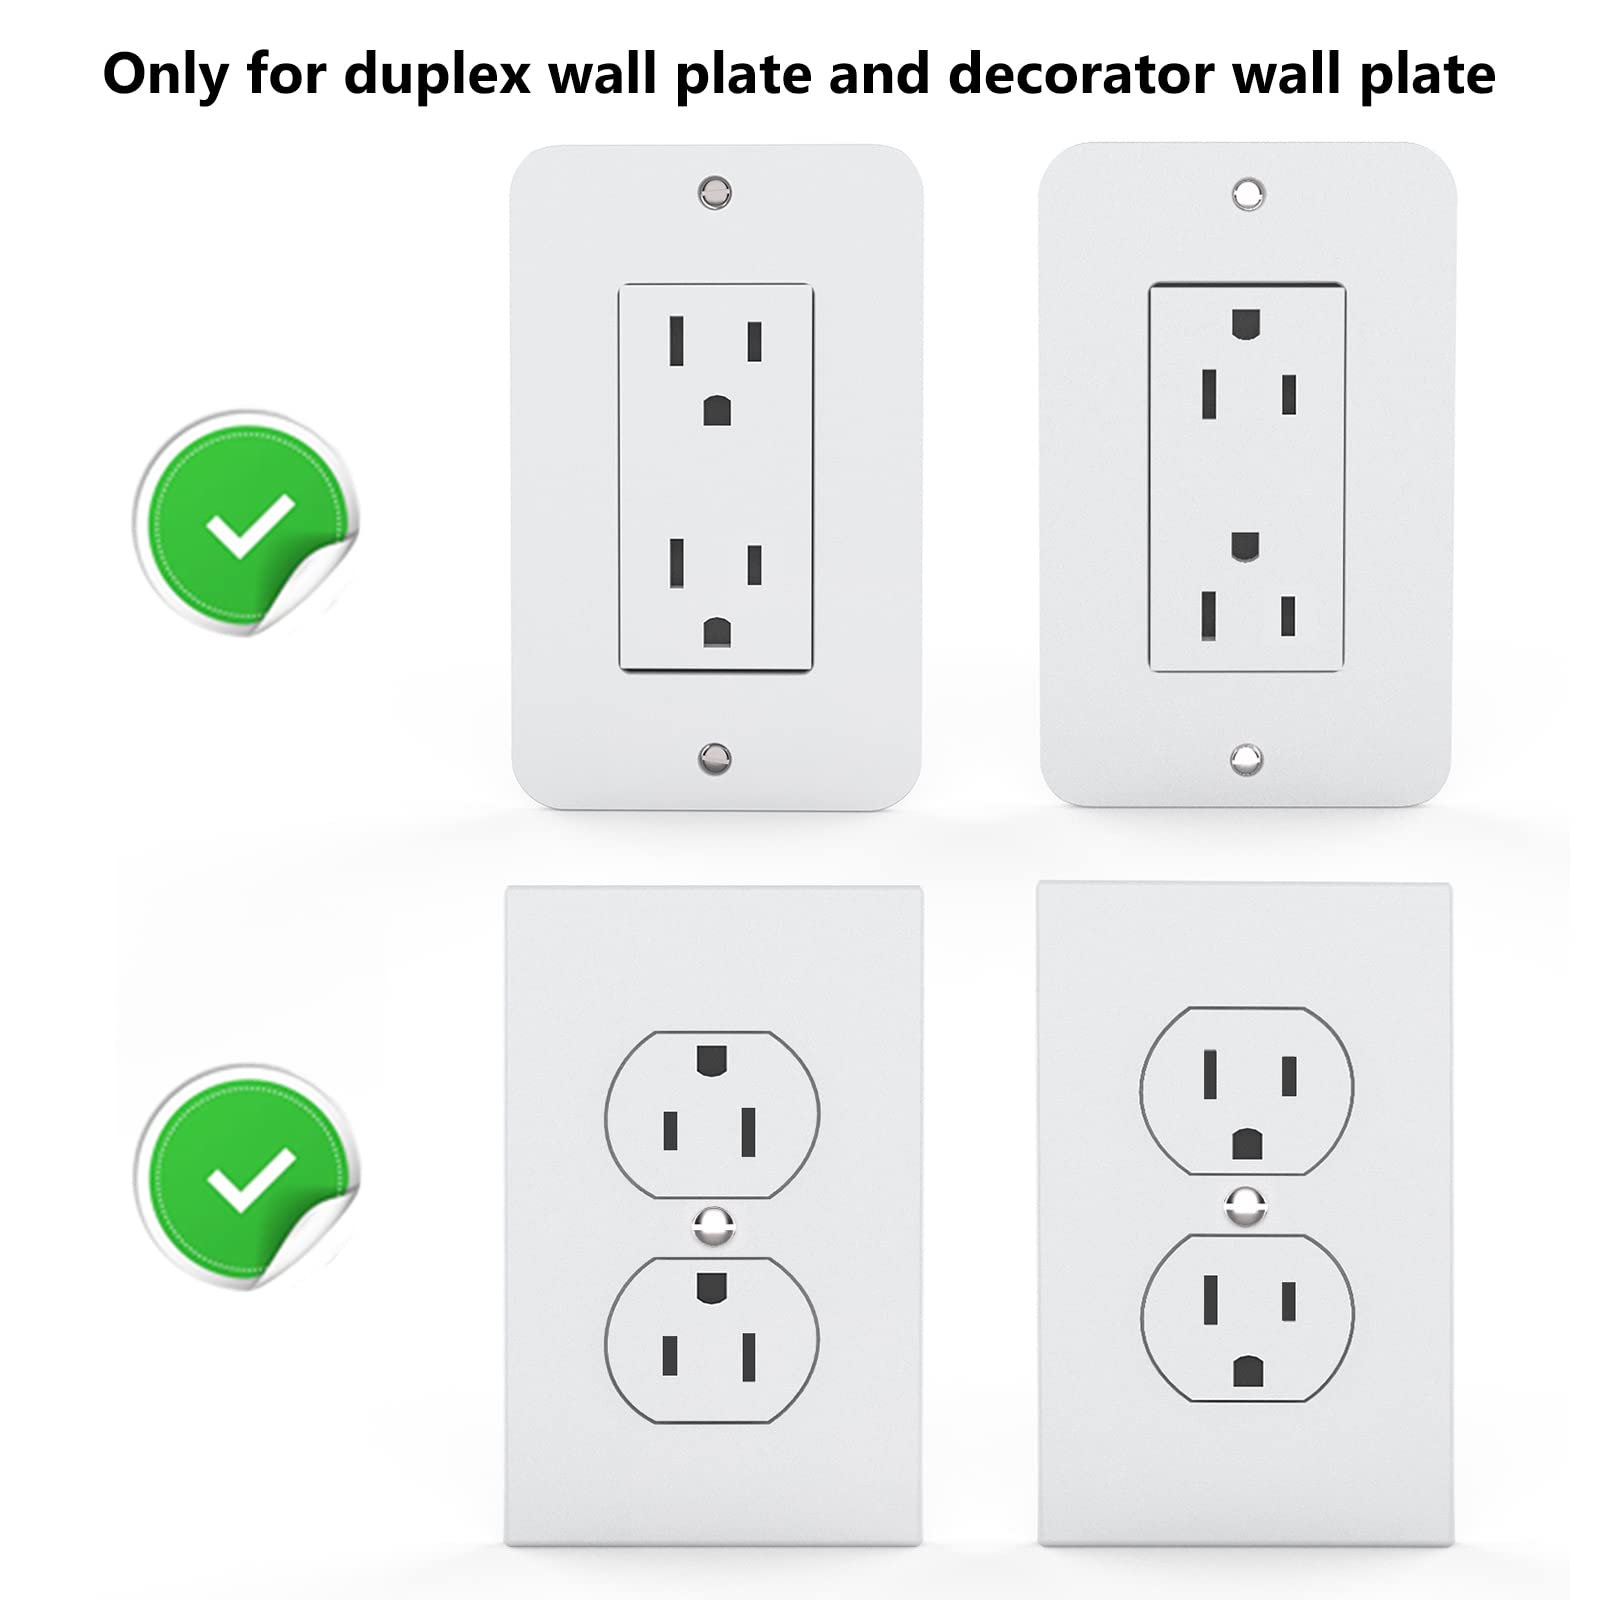 WALI Outlet Shelf Wall Holder, Standard Vertical Duplex DecorativeOutlet Space Saving for Smart Home Speakers, Power Tools, Toothbrush, Home Mini up to 10lbs (OLS001-W), 1 Pack, White